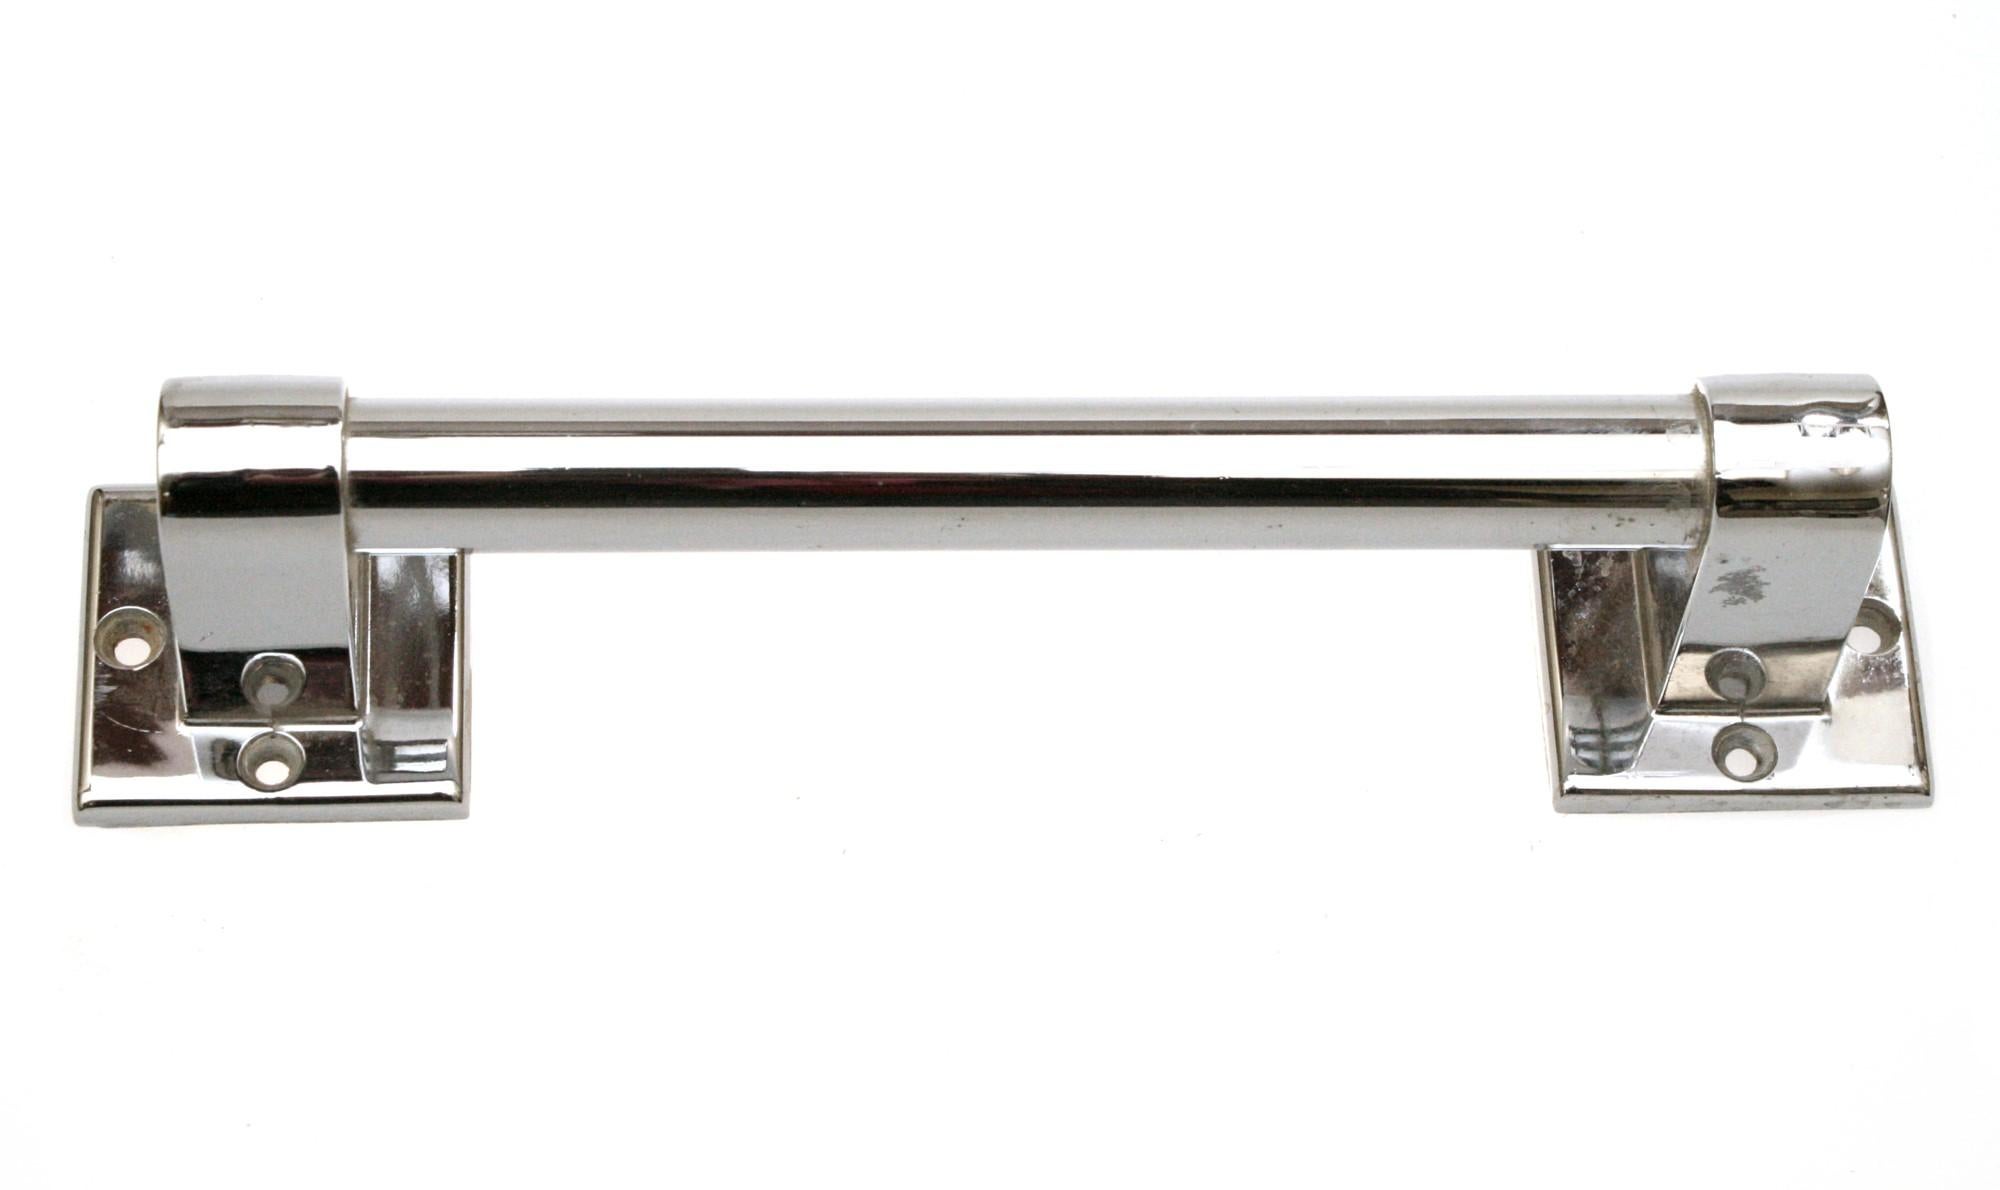 Early 20th Century Modern chrome plated brass towel holder. Made by Hallmack. This can be seen at our 400 Gilligan St location in Scranton, PA. Measure: 10.75 in.